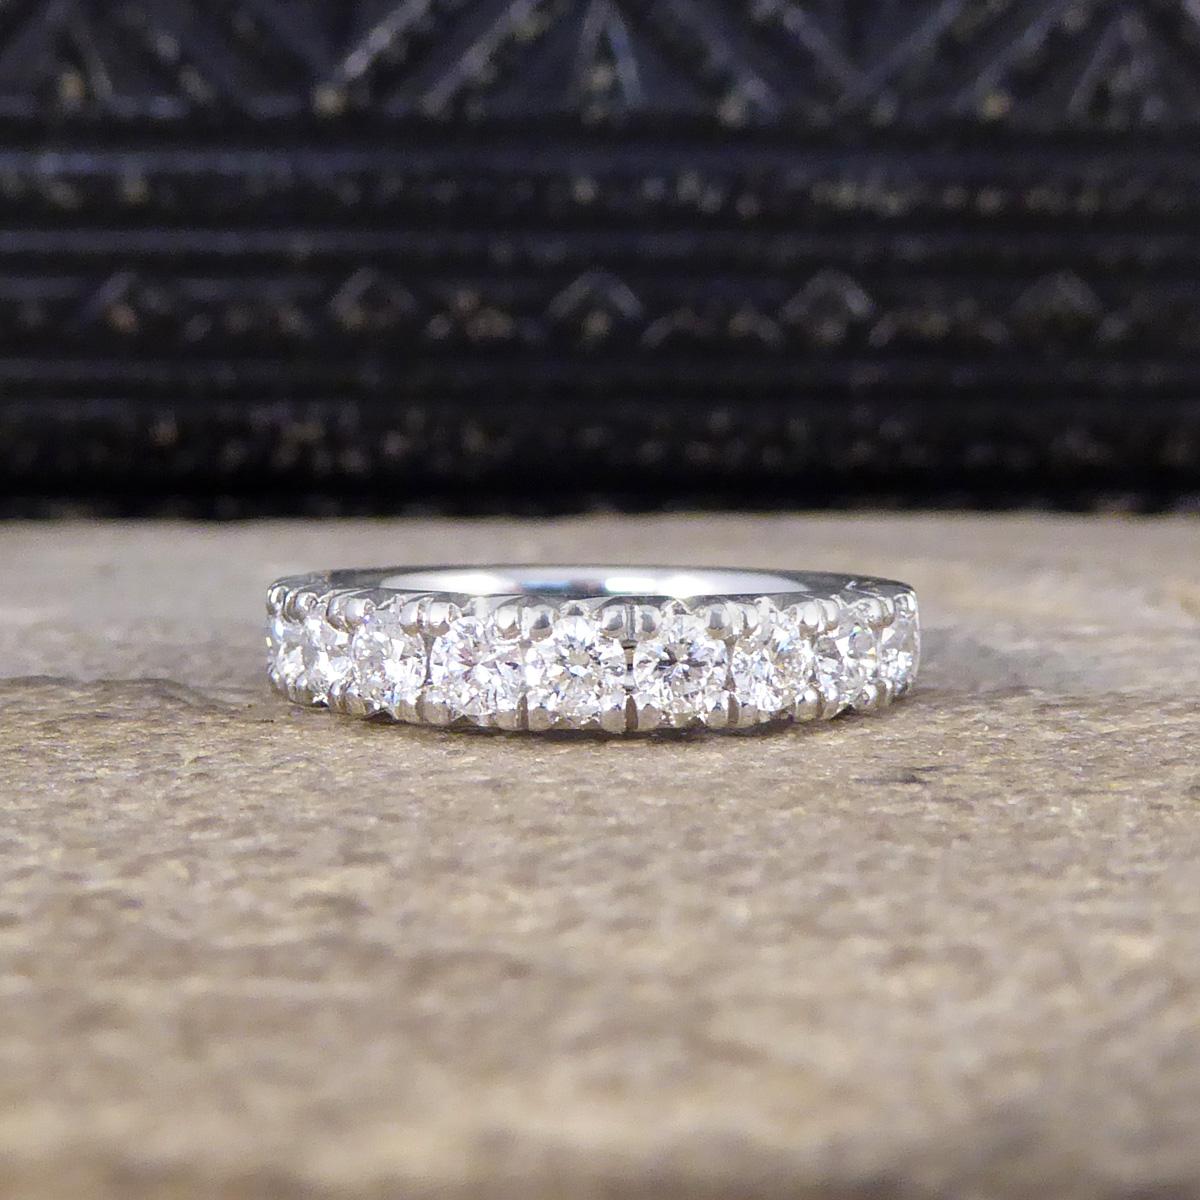 New Diamond Set Eternity Ring with 0.88ct Modern Brilliant Cut Diamonds in Plat For Sale 1